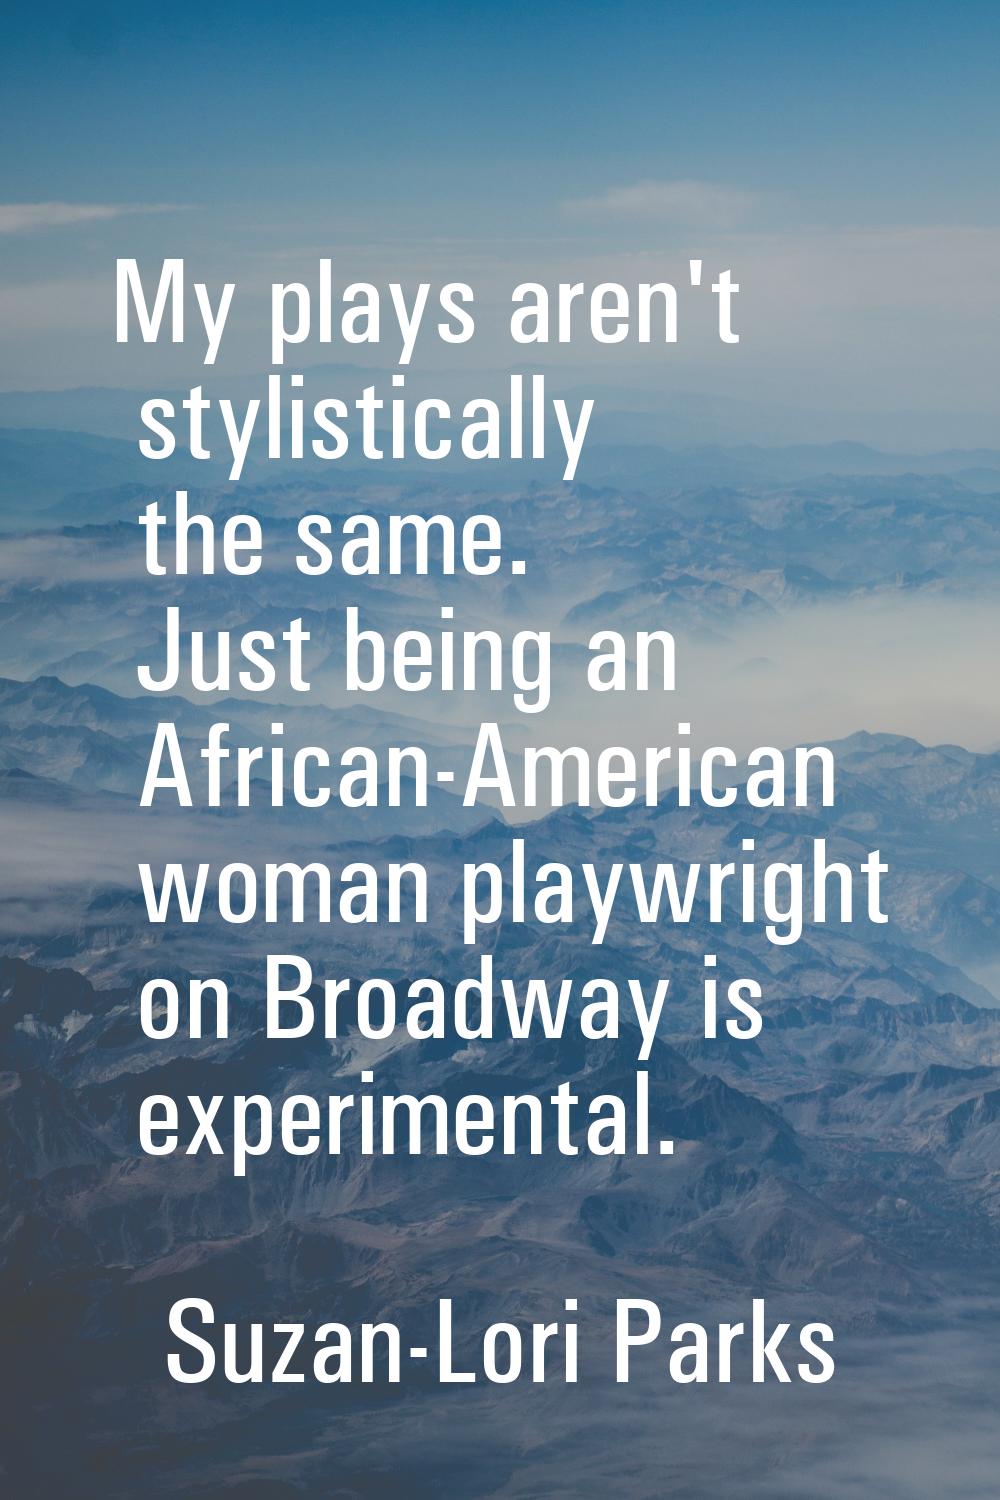 My plays aren't stylistically the same. Just being an African-American woman playwright on Broadway